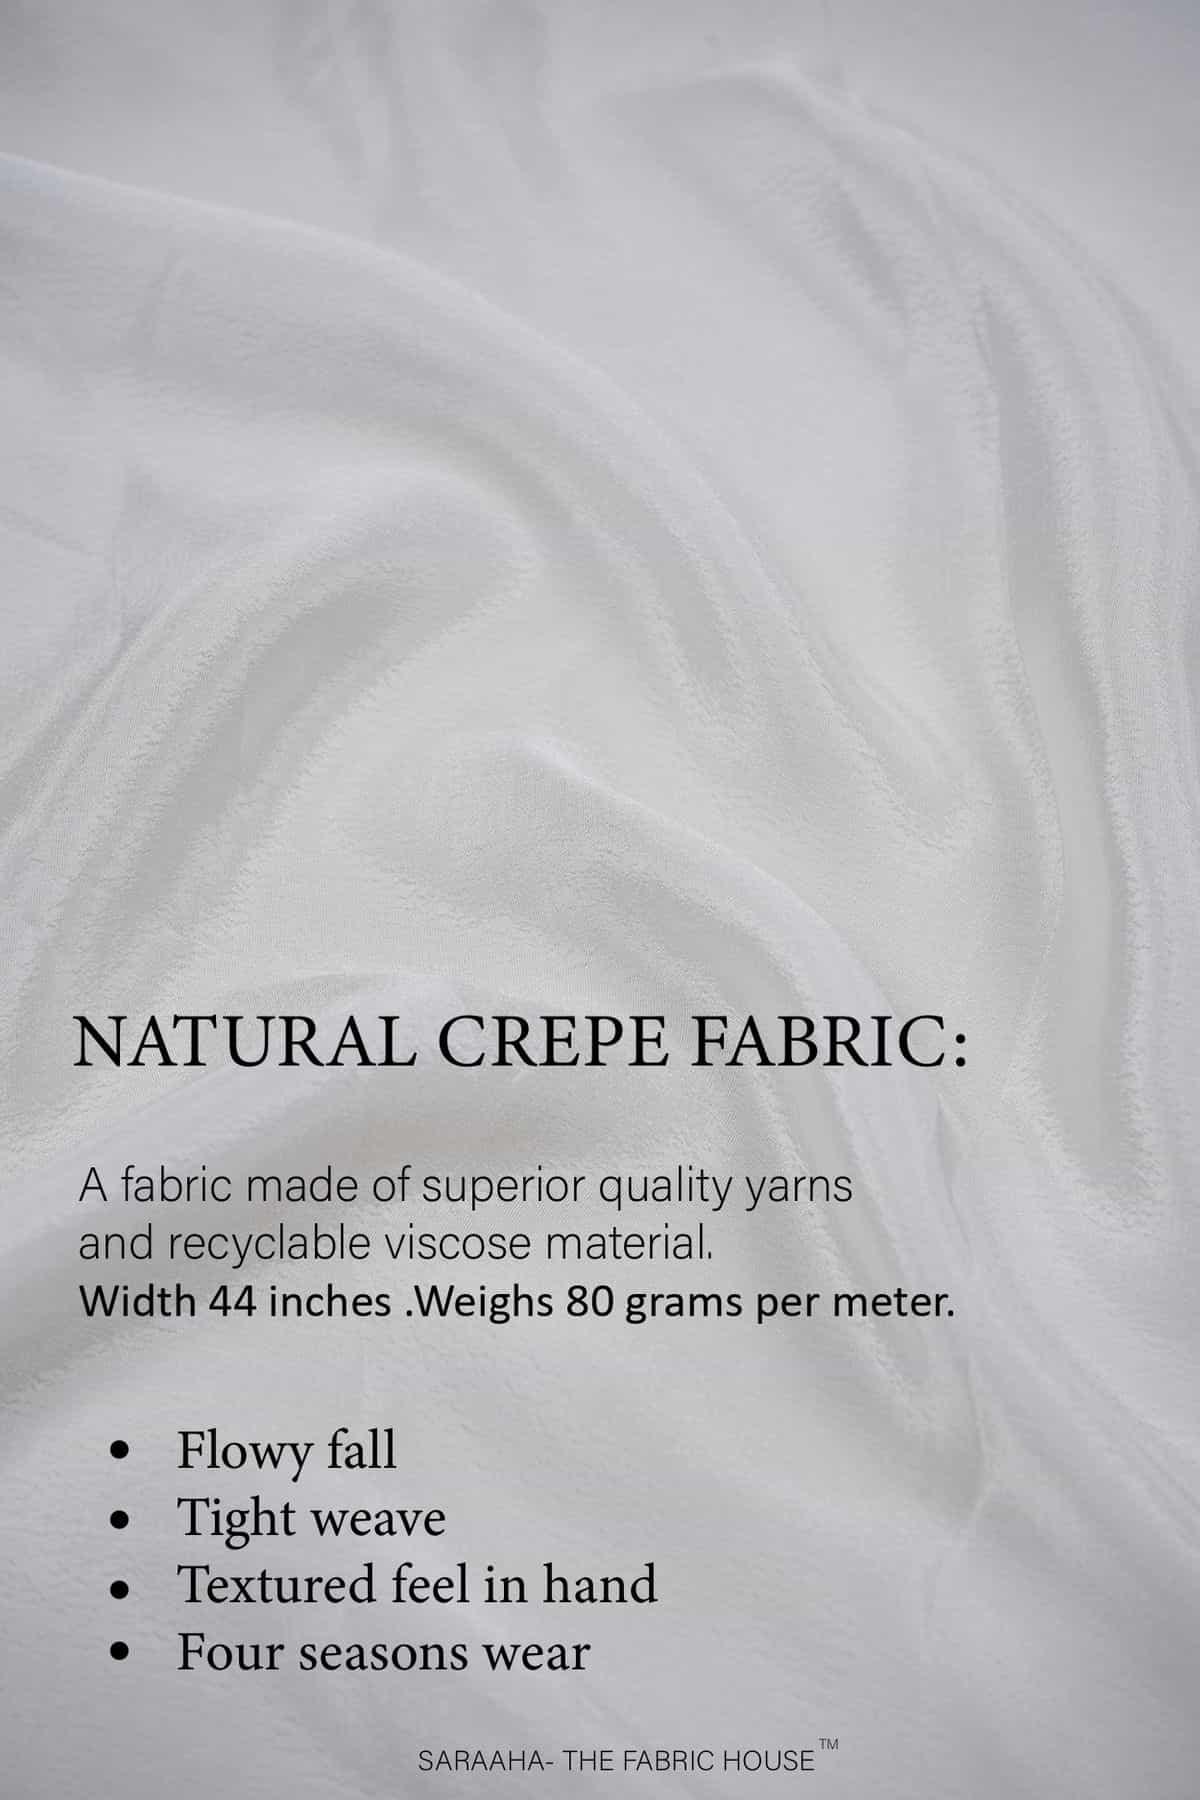 Plain White Natural Crepe Viscose Base 80 GLM - saraaha.com - Biodegradable and RECYCLABLE, blouses, Crepe, Dresses, dupattas, Dyeable white, Evening gowns, Festive wear, Flowy, formal wear, Home Decor, Lining garments, Lustrous, Rayon, RFD, Shiny, skirts, Suiting, textured, Viscose, Women Wear